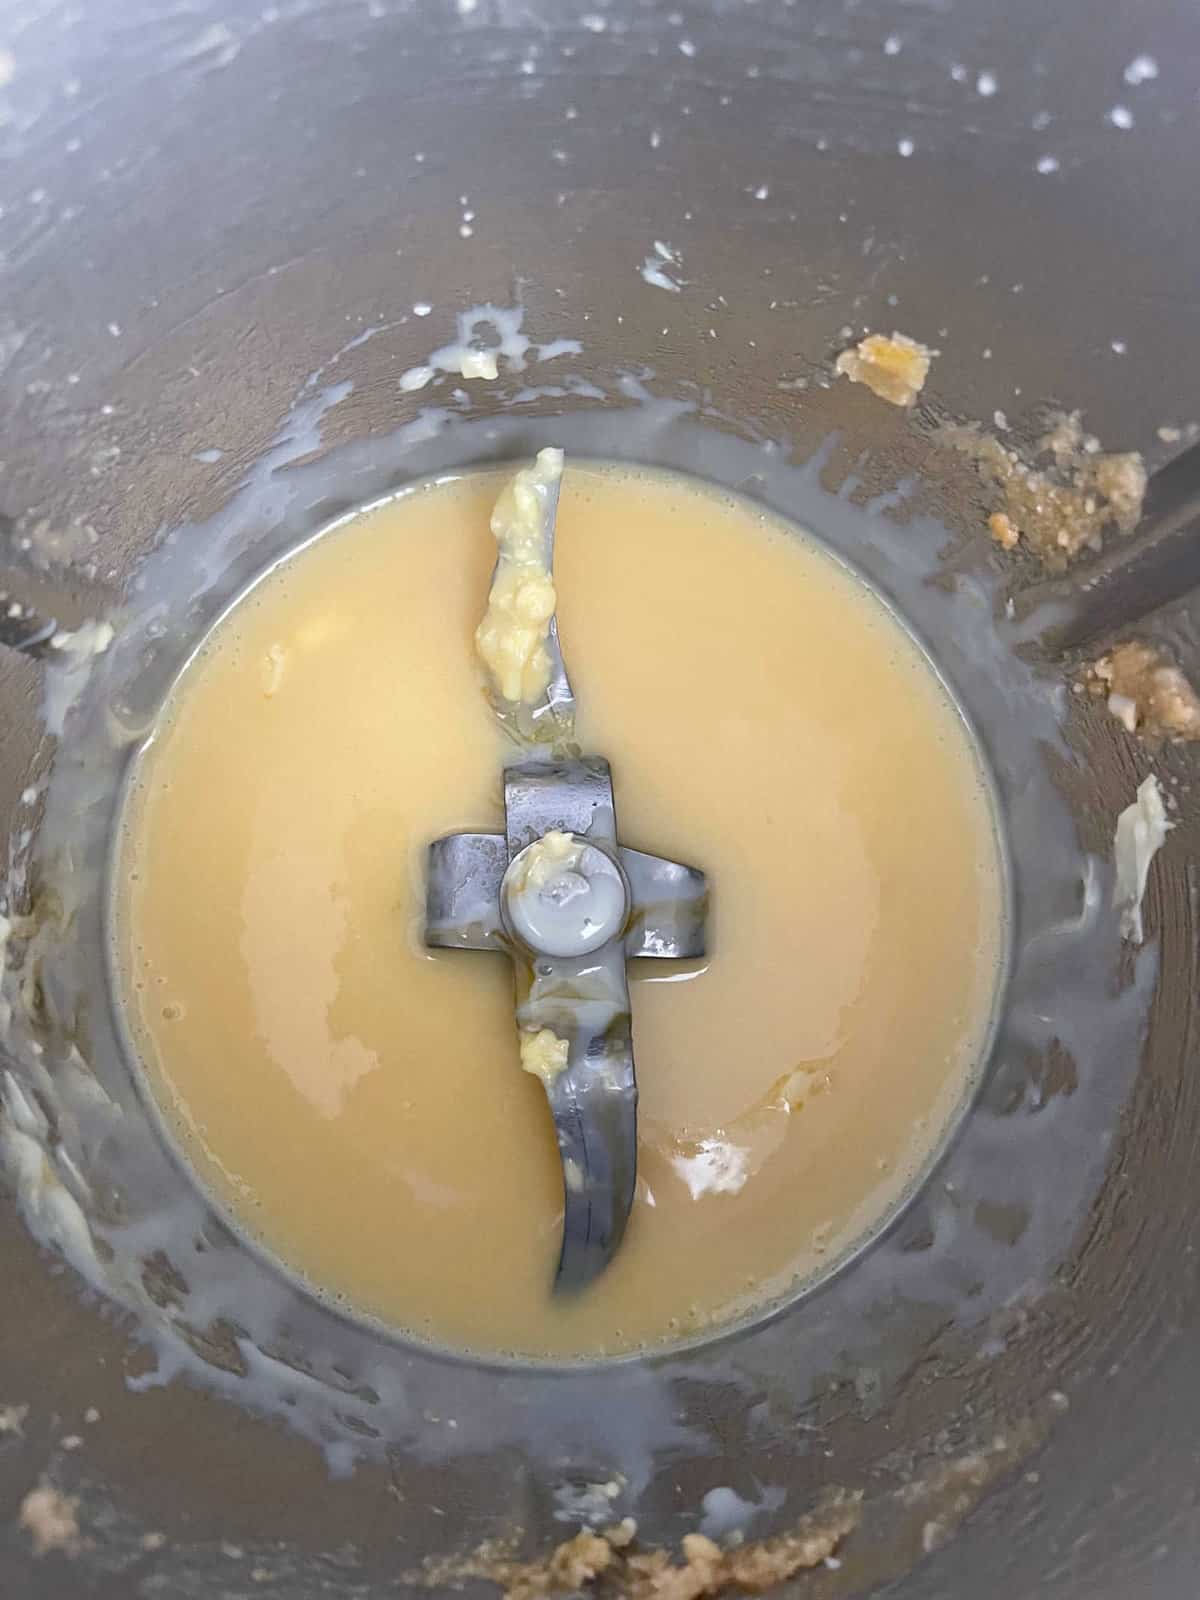 Melted butter and sweetened condensed milk in a Thermomix bowl.